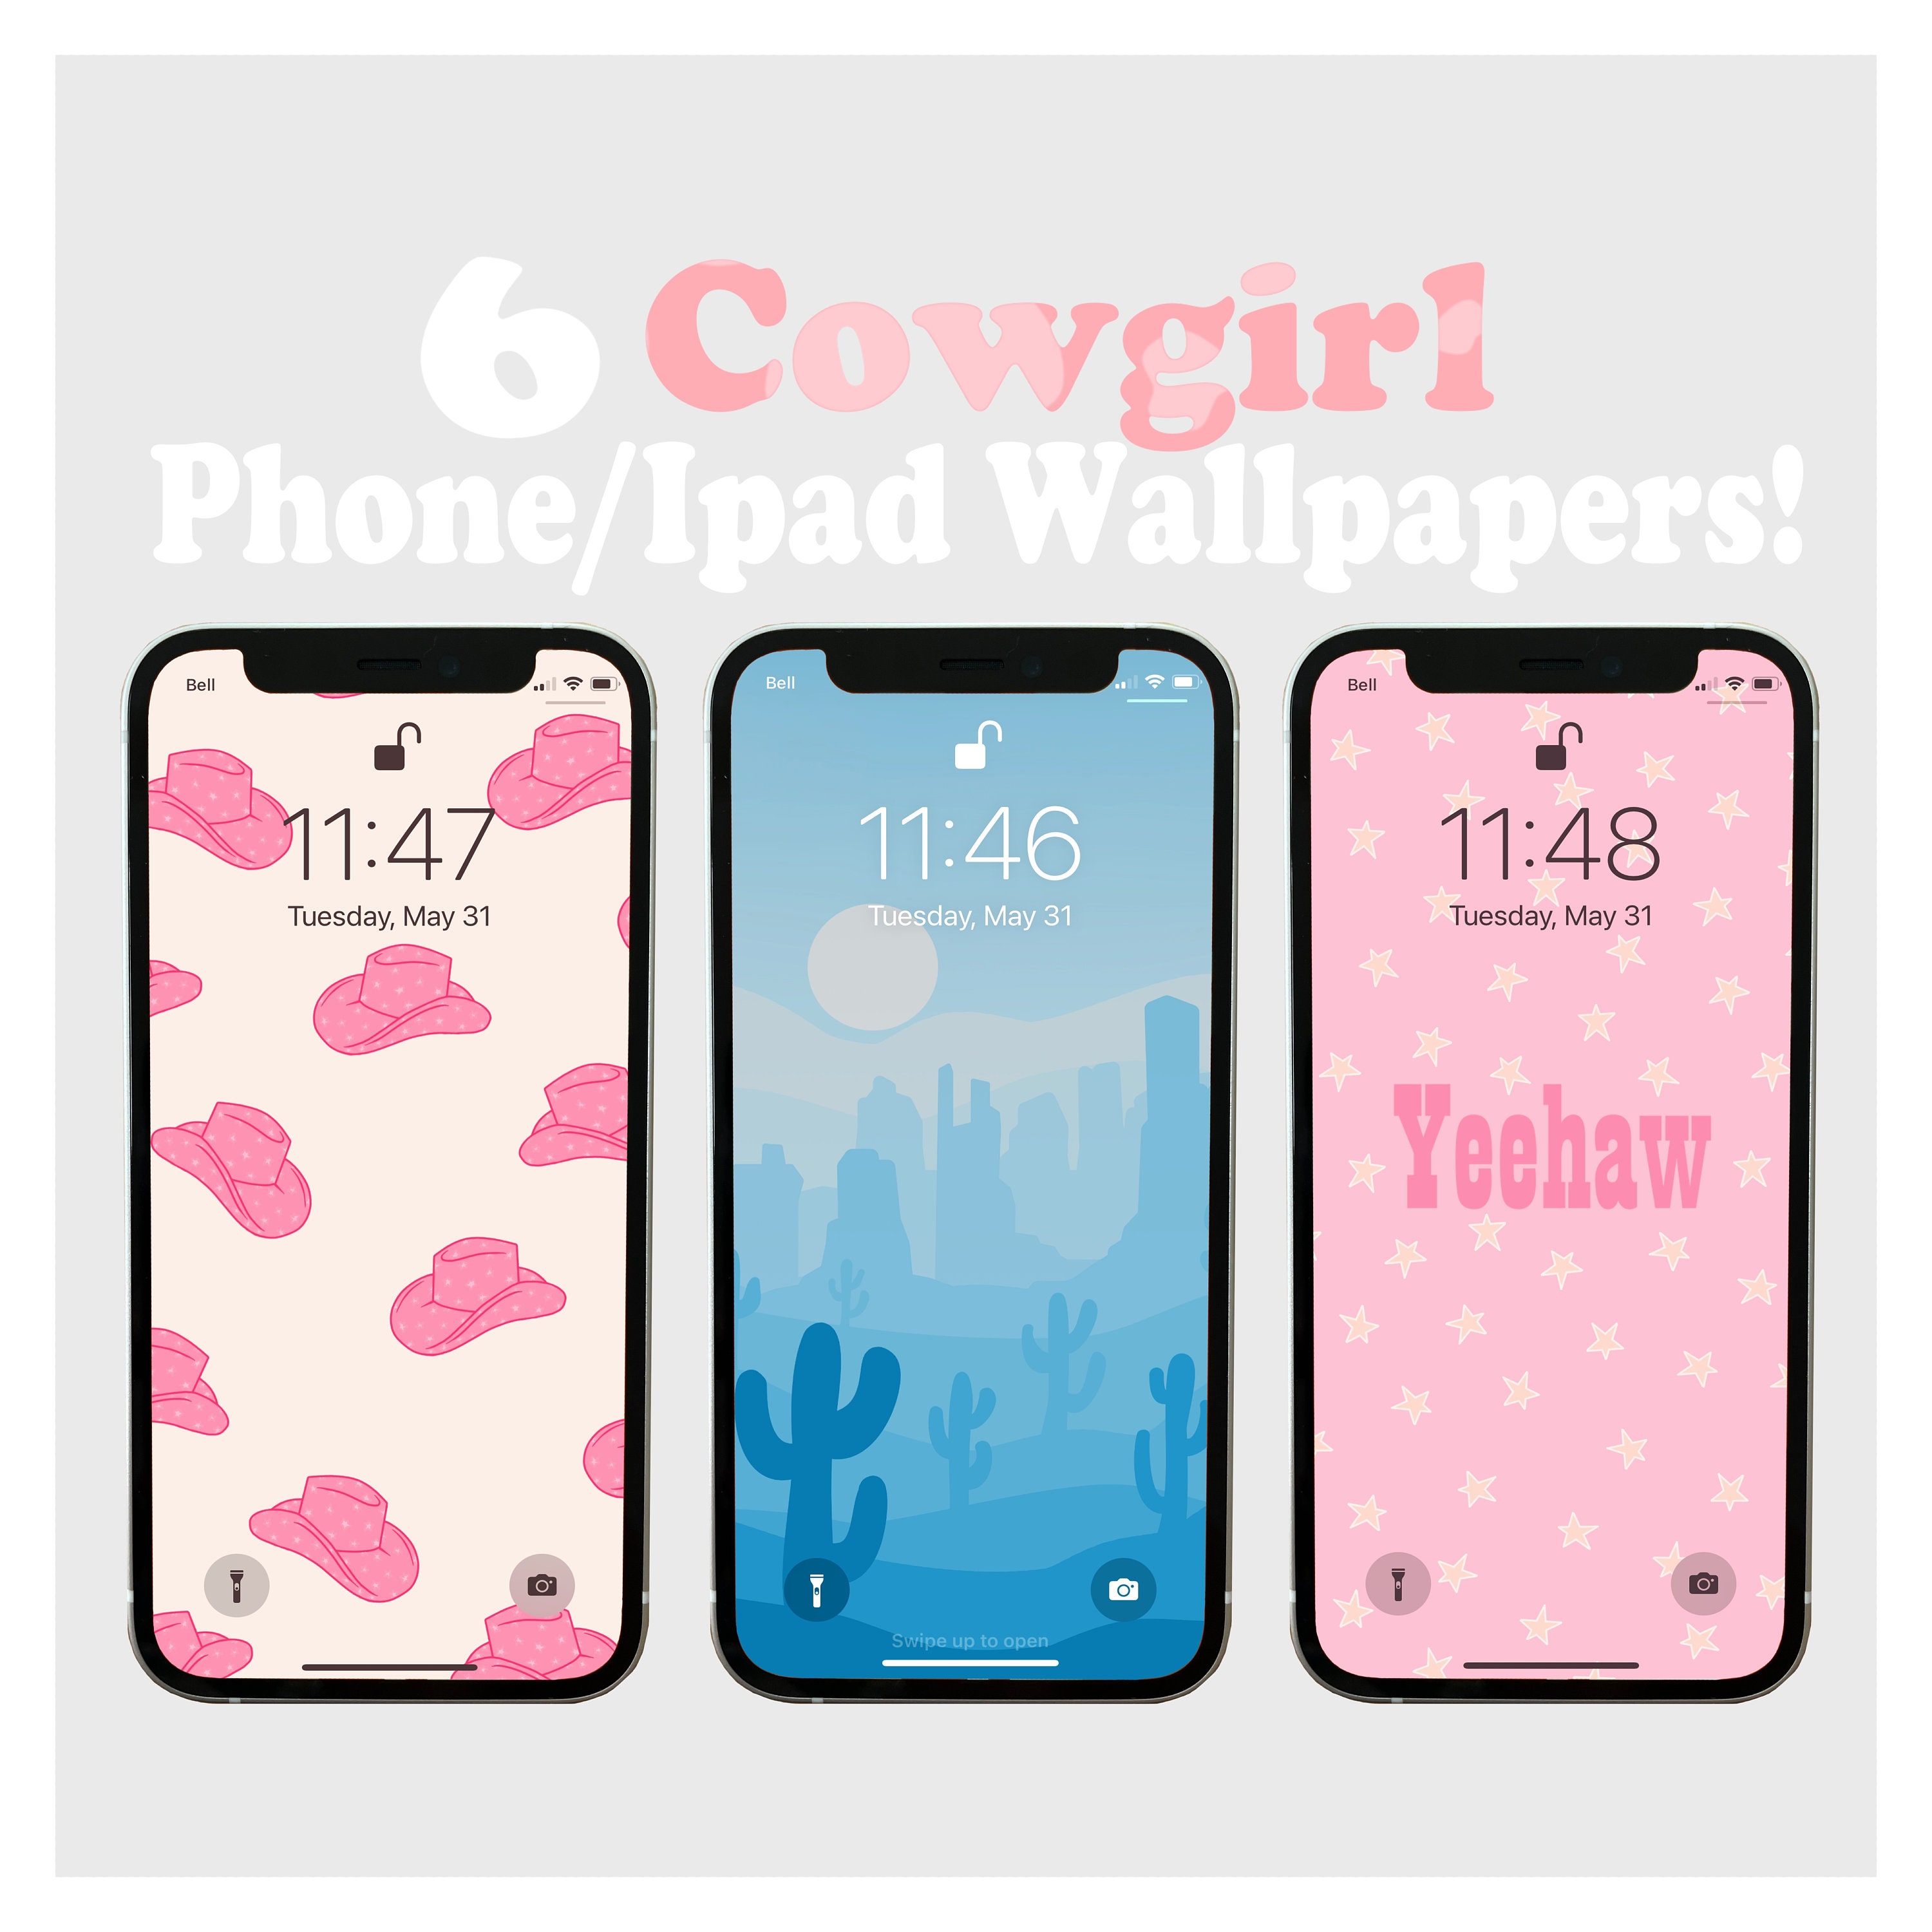 6 Cowgirl Inspired Phoneipad Wallpapers Digital Download  Etsy Ireland